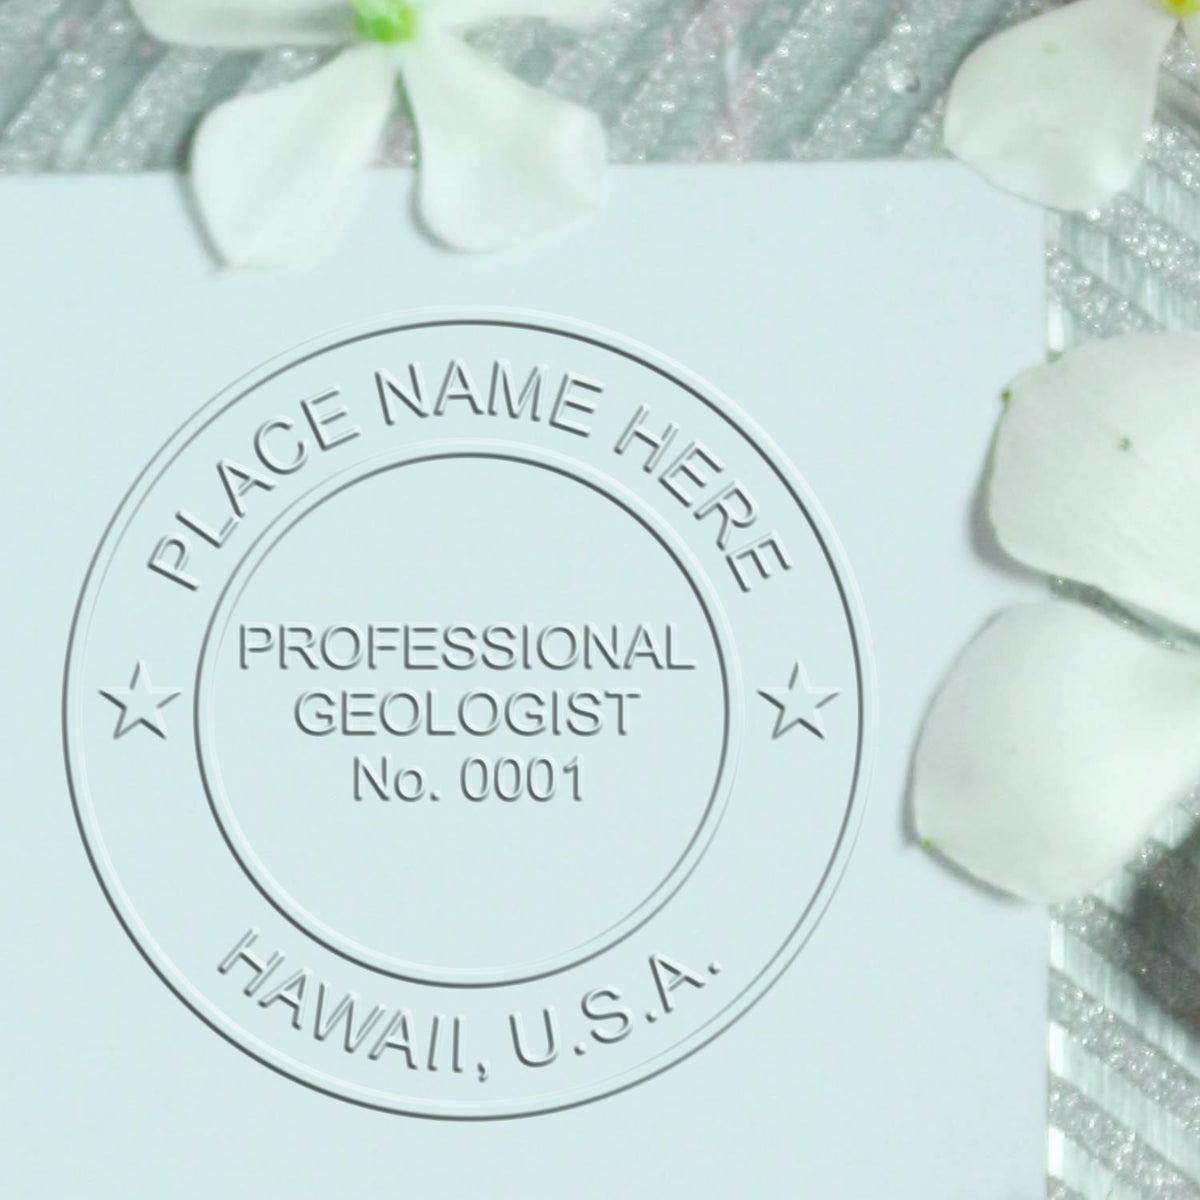 An alternative view of the State of Hawaii Extended Long Reach Geologist Seal stamped on a sheet of paper showing the image in use